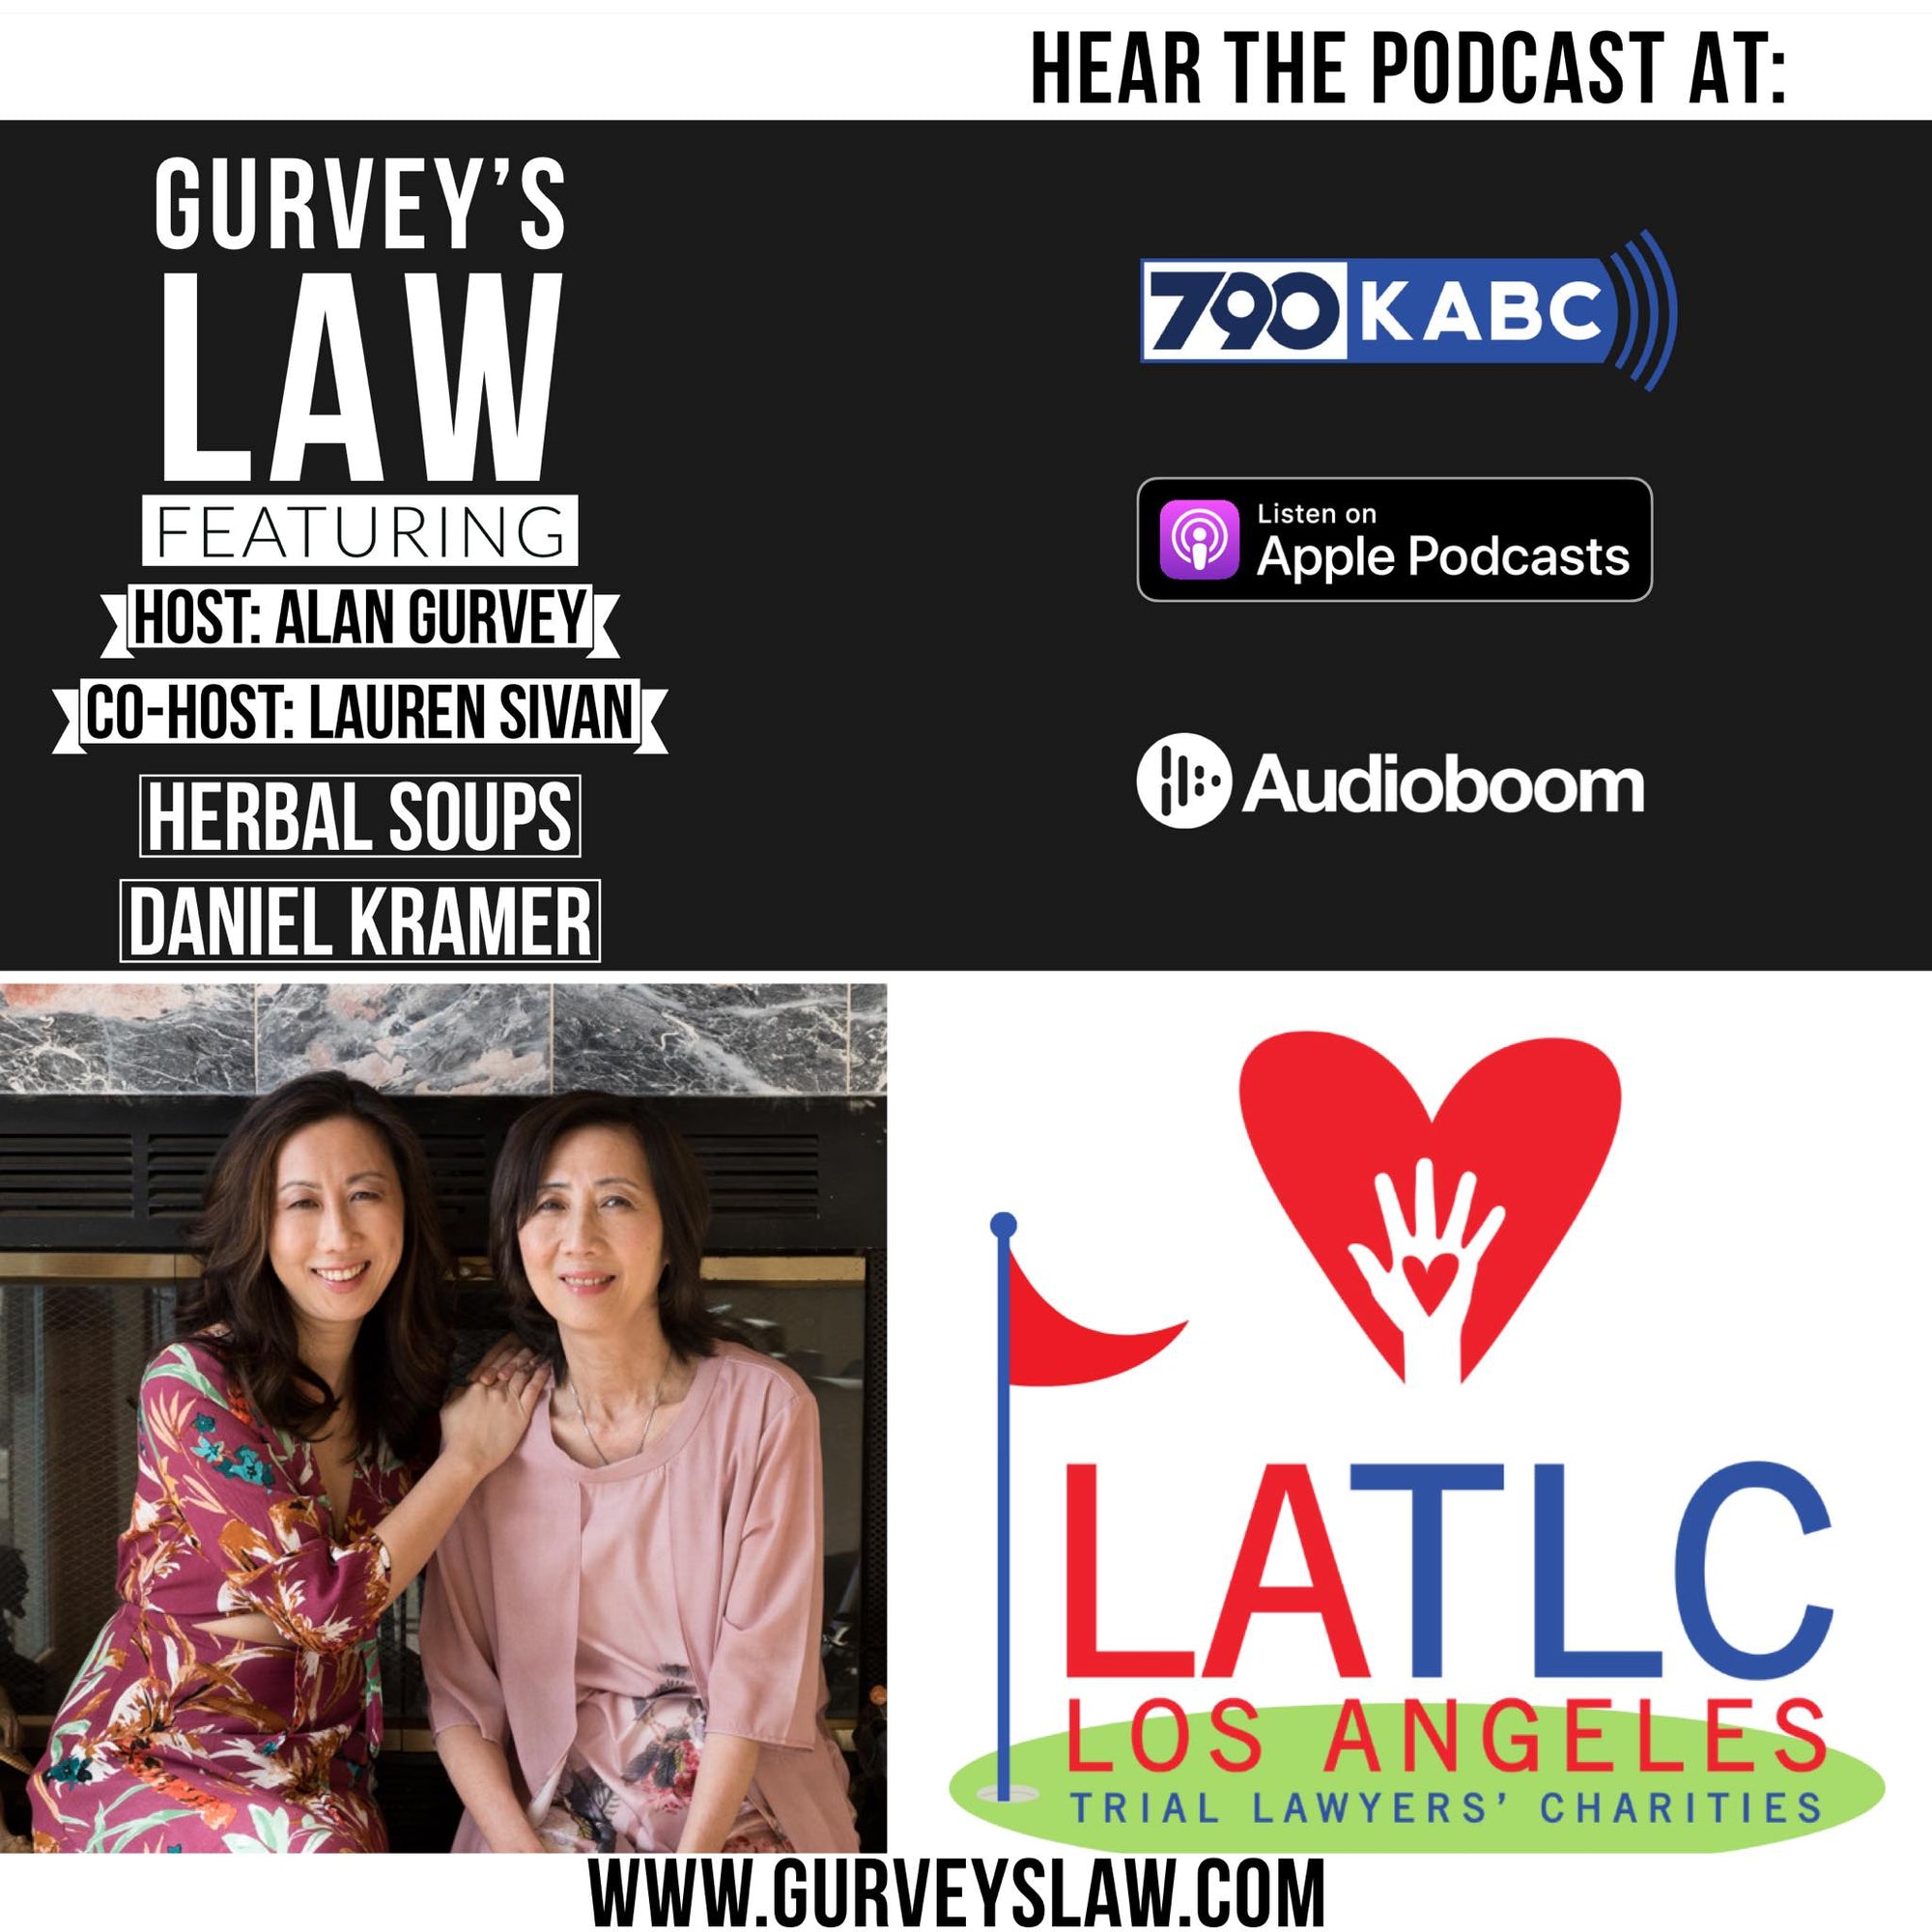 Interview With Gurvey's Law On KABC Talkradio